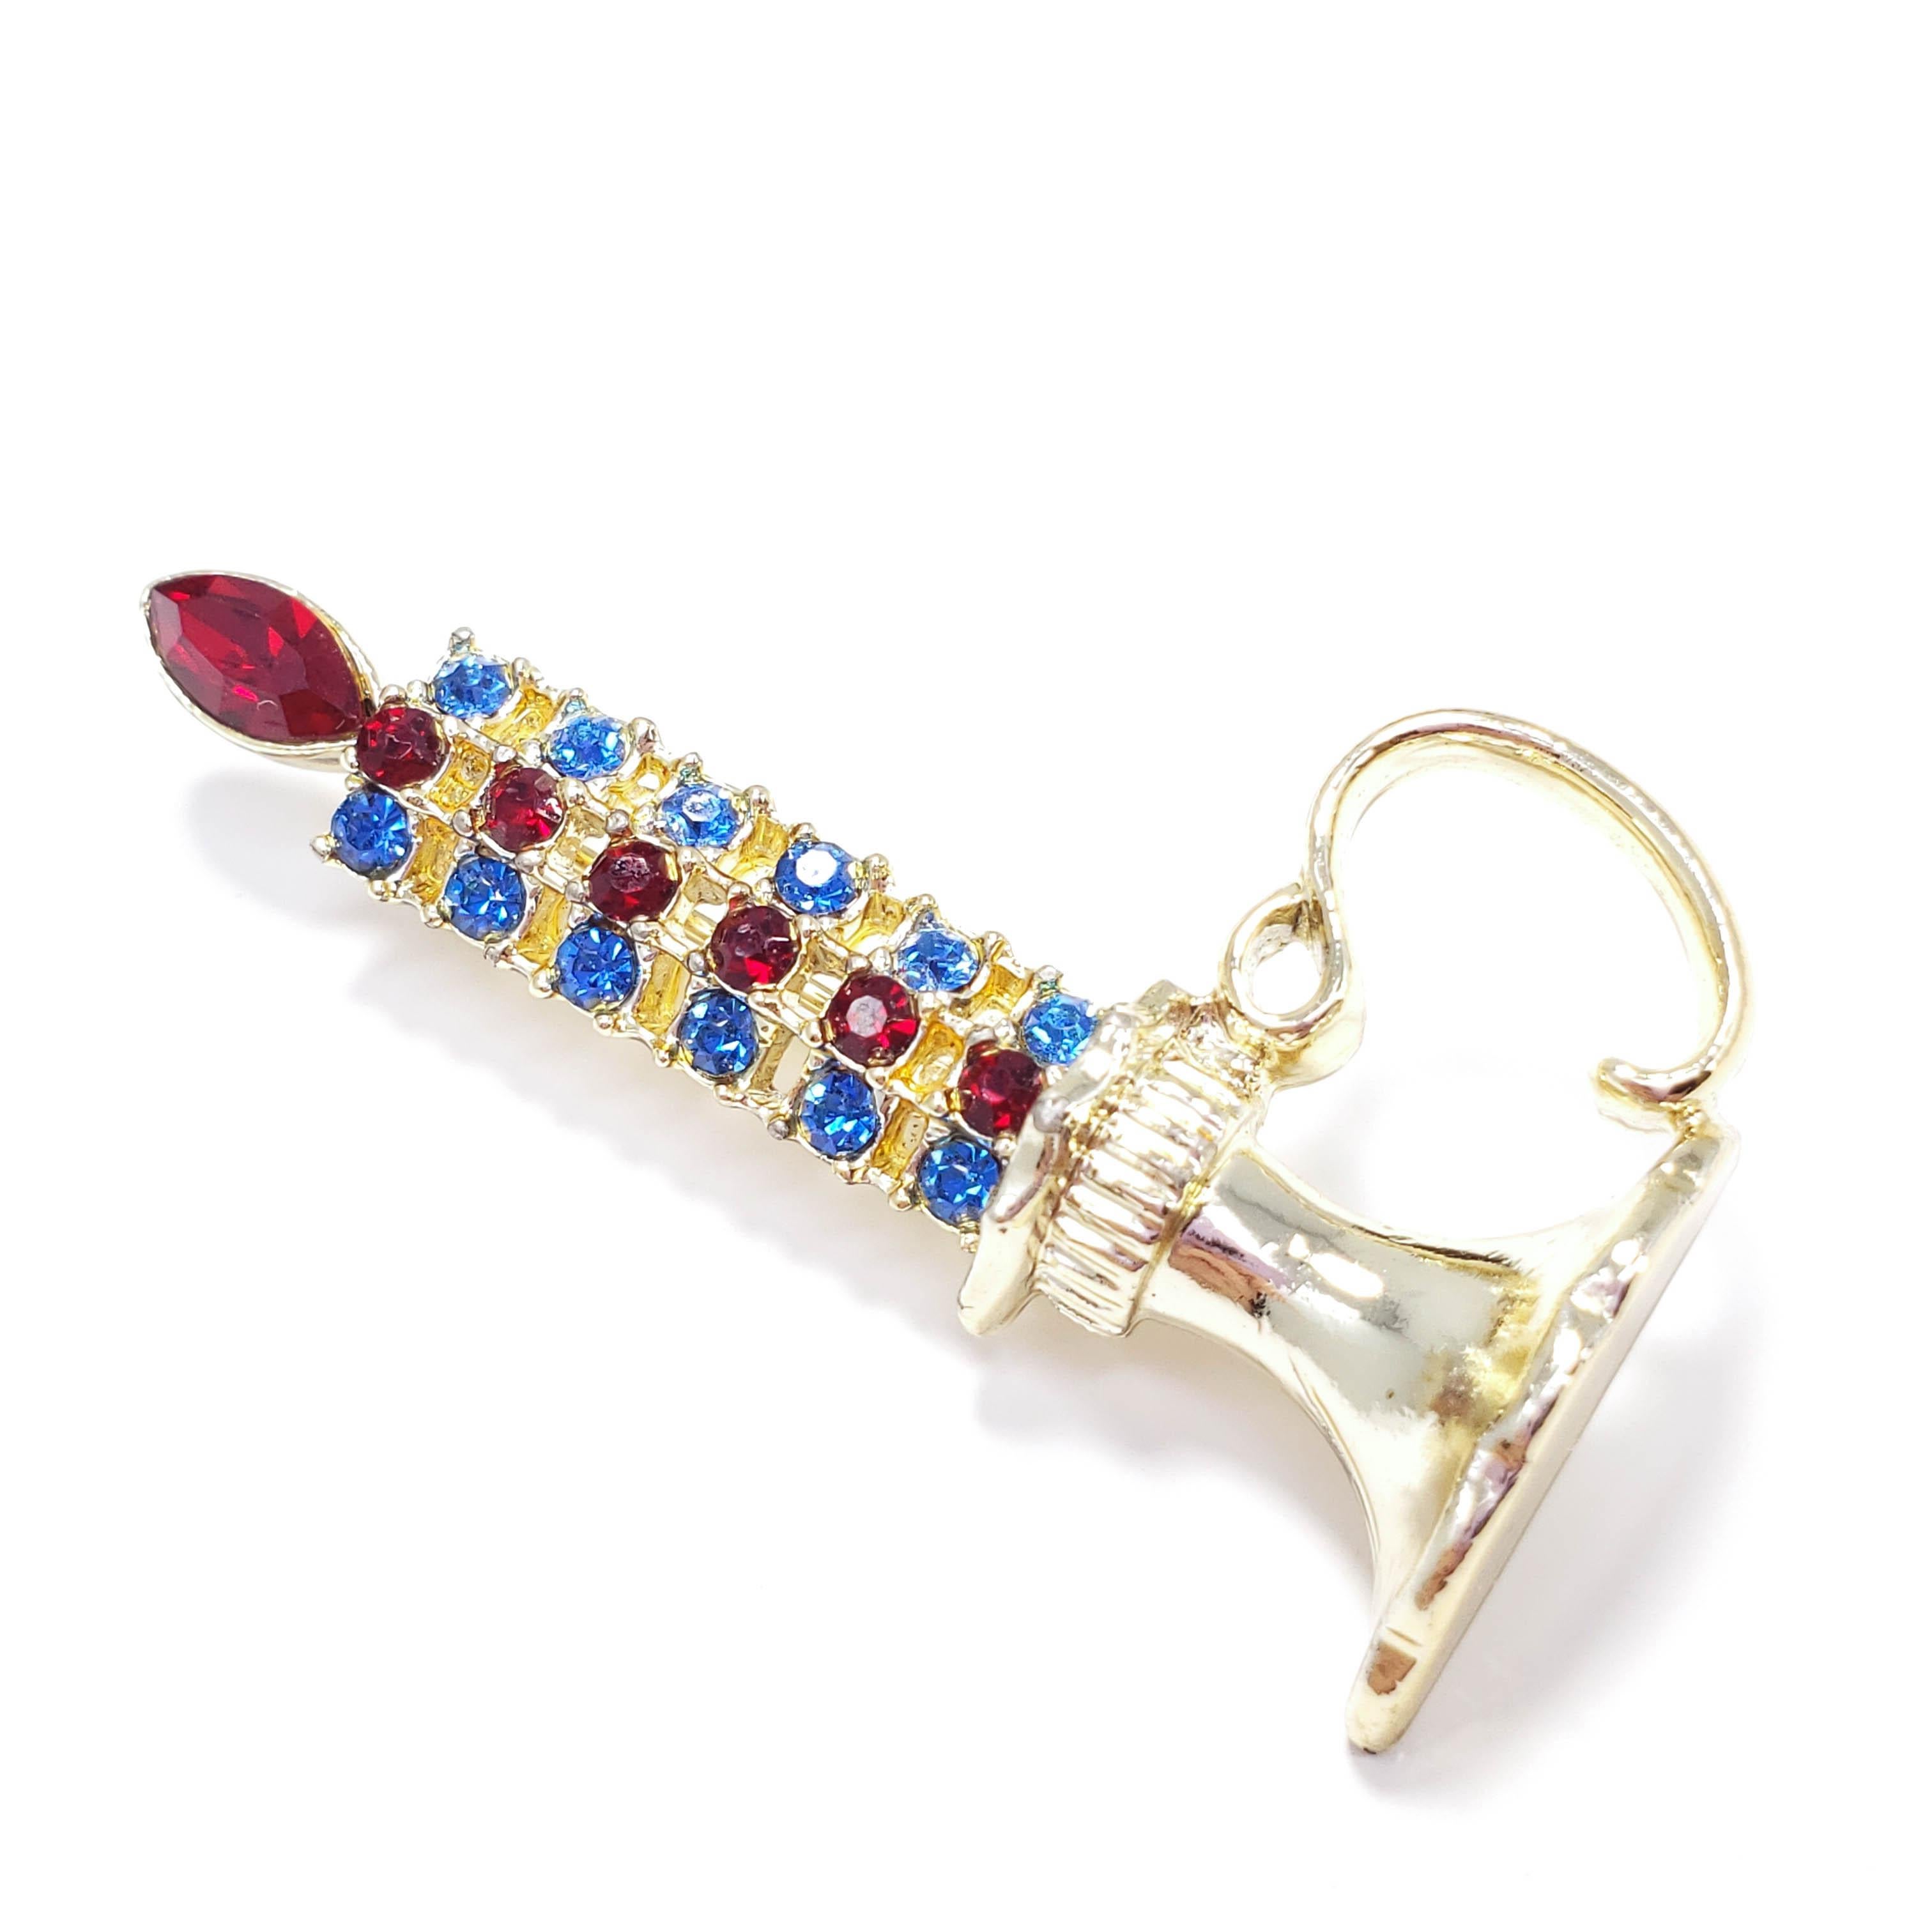 A whimsical candlestick pin/brooch, featuring blue and red crystals set in gold-plated metal. Signed © Emmons.

Emmons Jewelry was founded by Charles Stuart, the same man who founded Sarah Coventry. Emmons Jewelry went out of business in 1981,